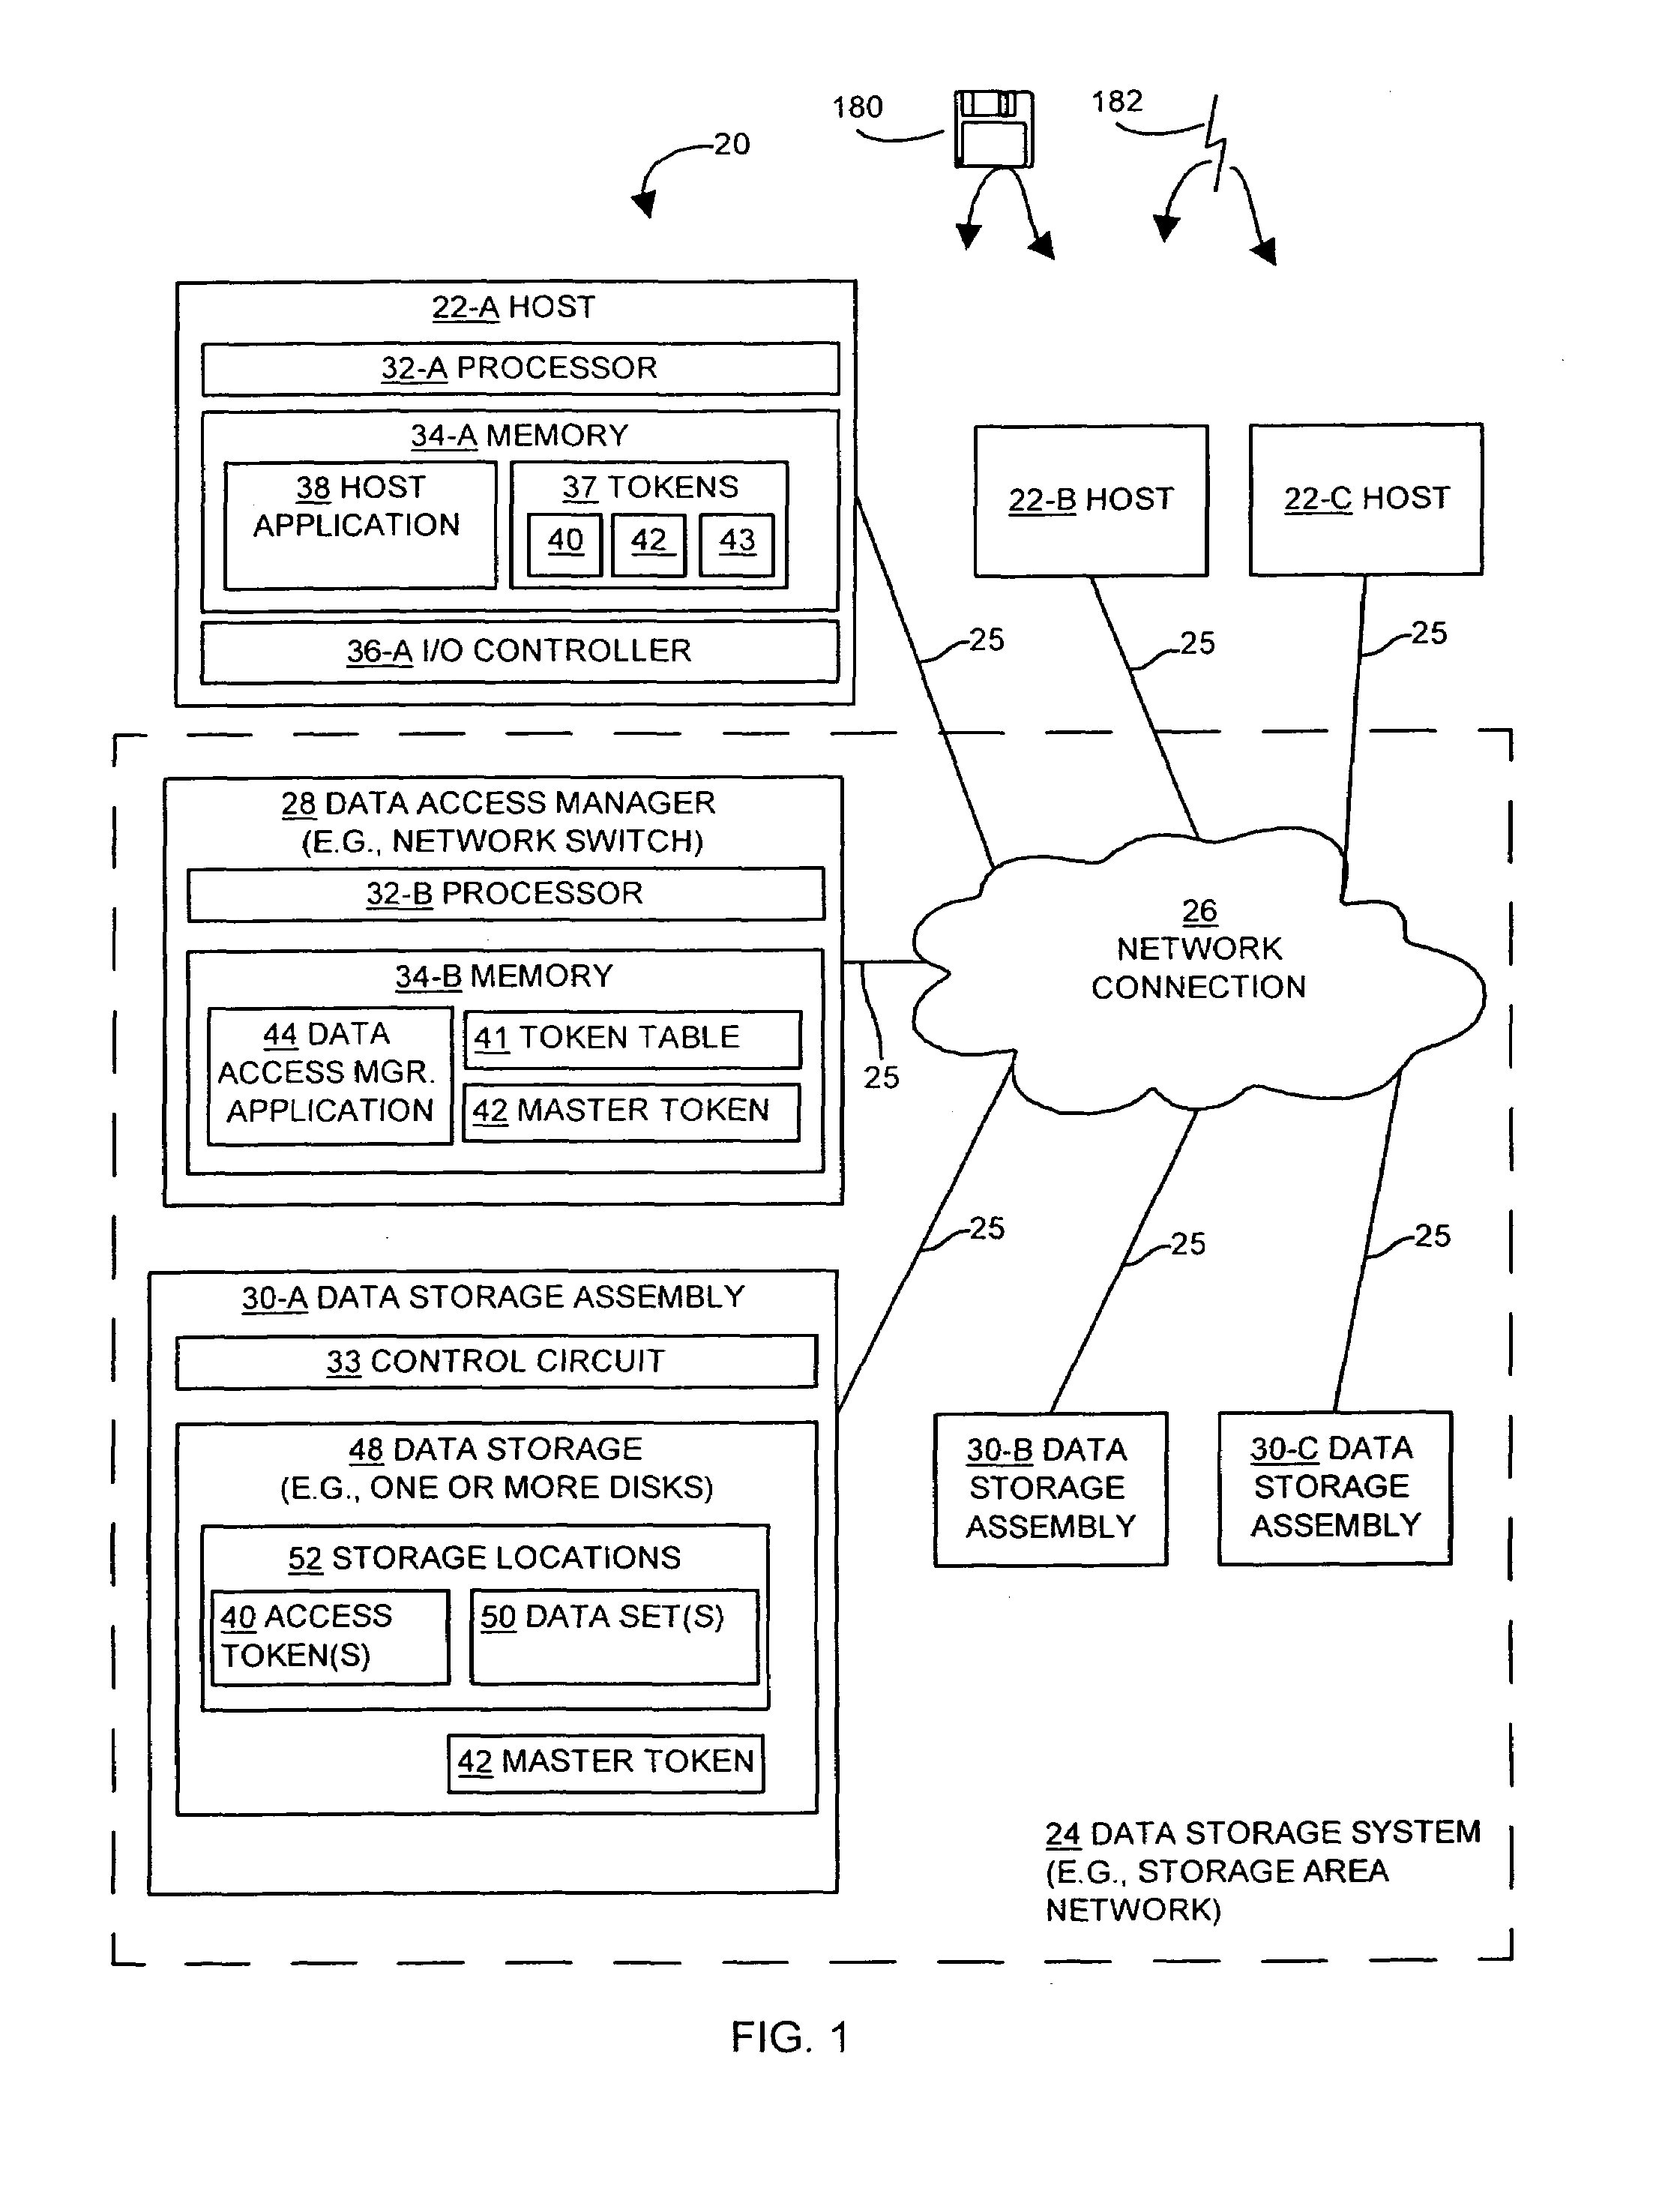 Methods and apparatus for providing security for a data storage system